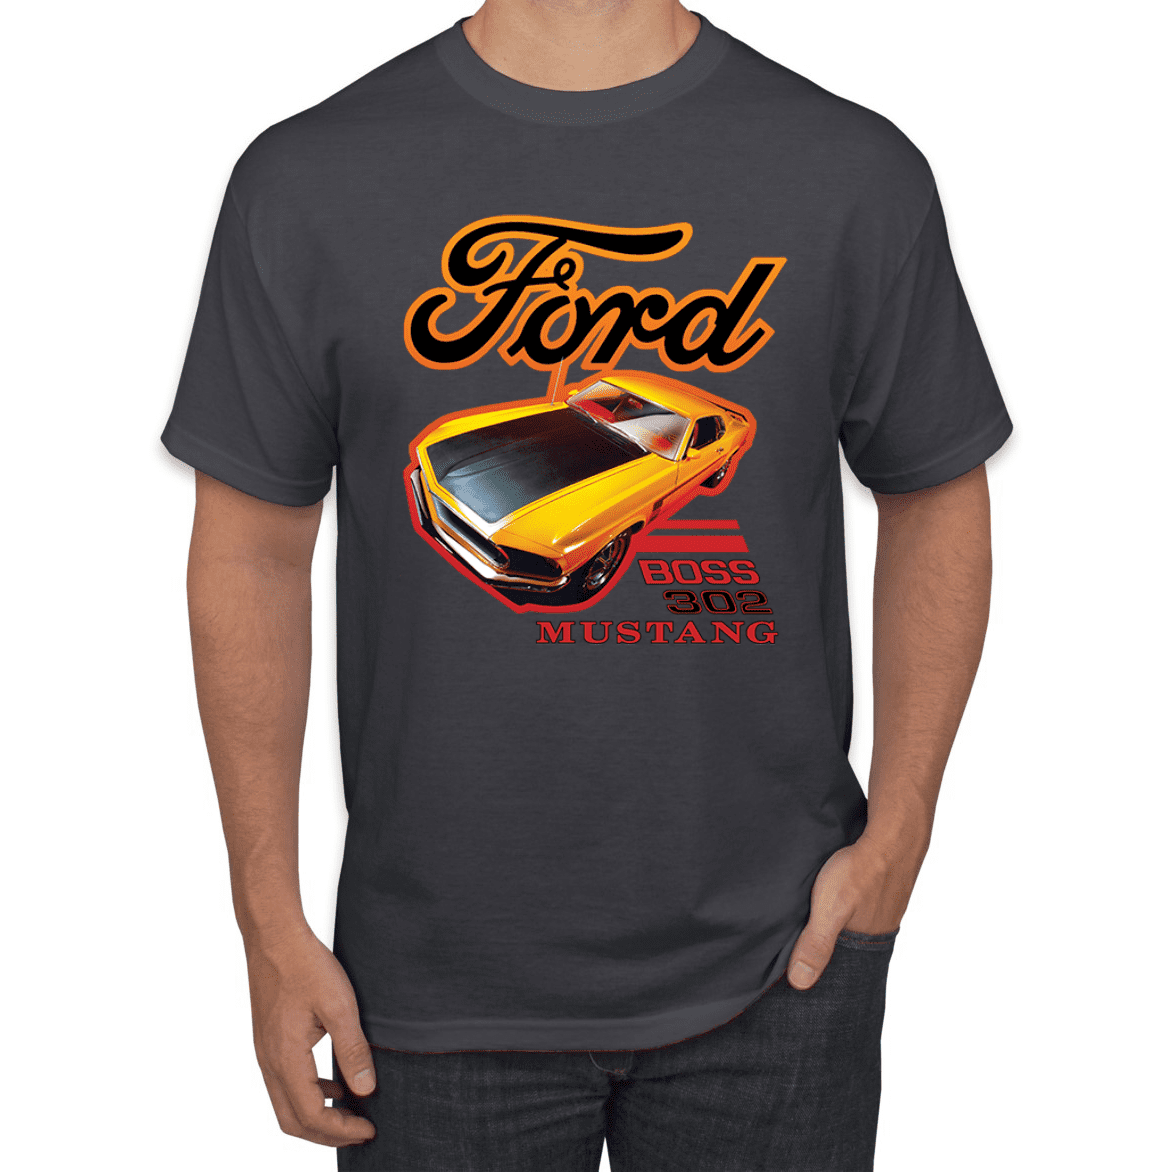 1969 Ford Mustang Boss 302 T Shirt Tees Vintage Classic Car Size S-3XL 